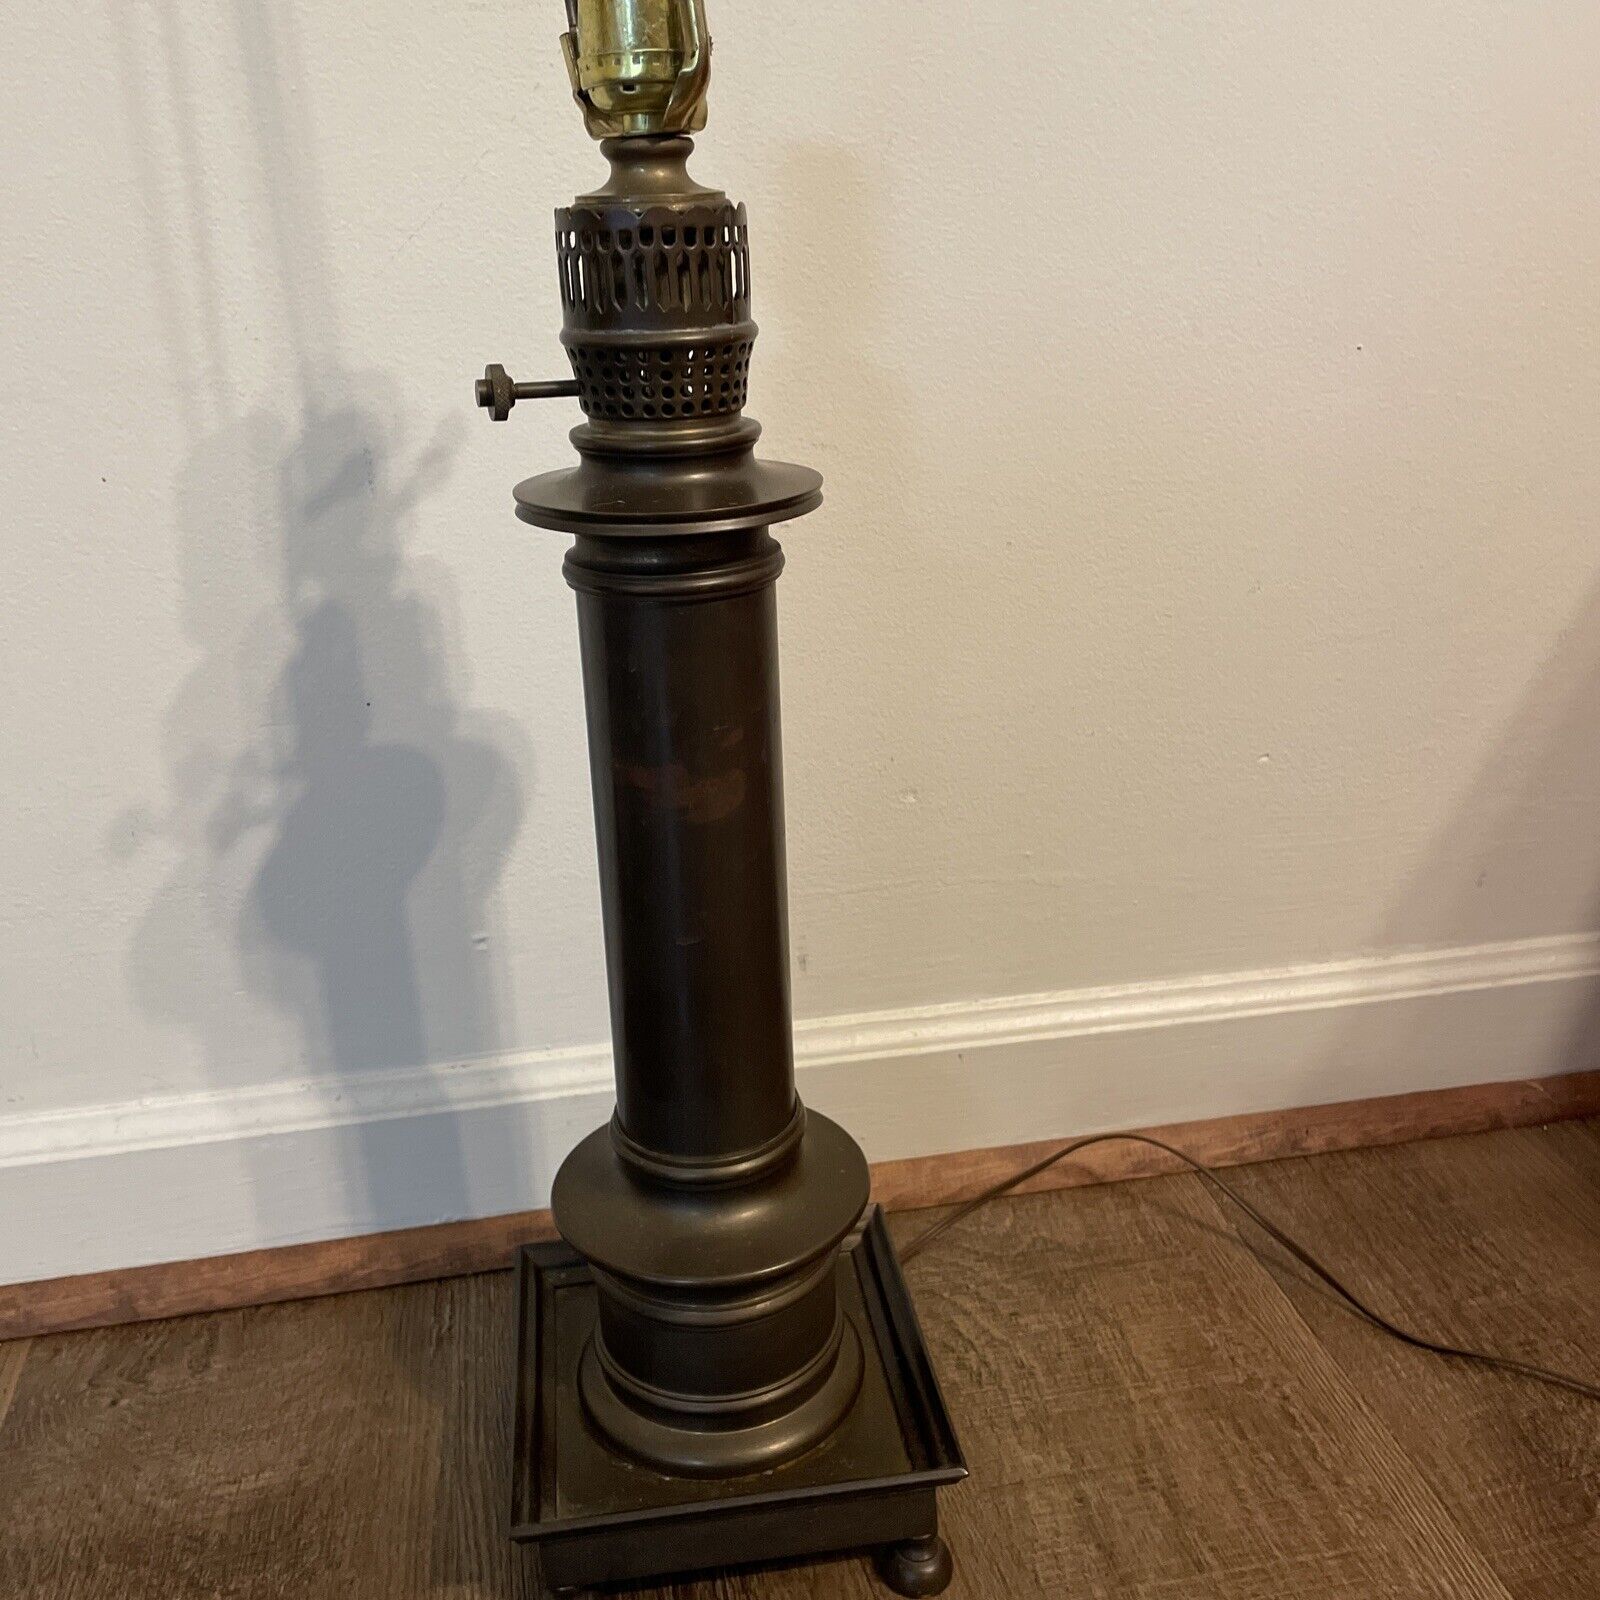 Antique Brass Table Lamp 33.5” Tall. Works Great